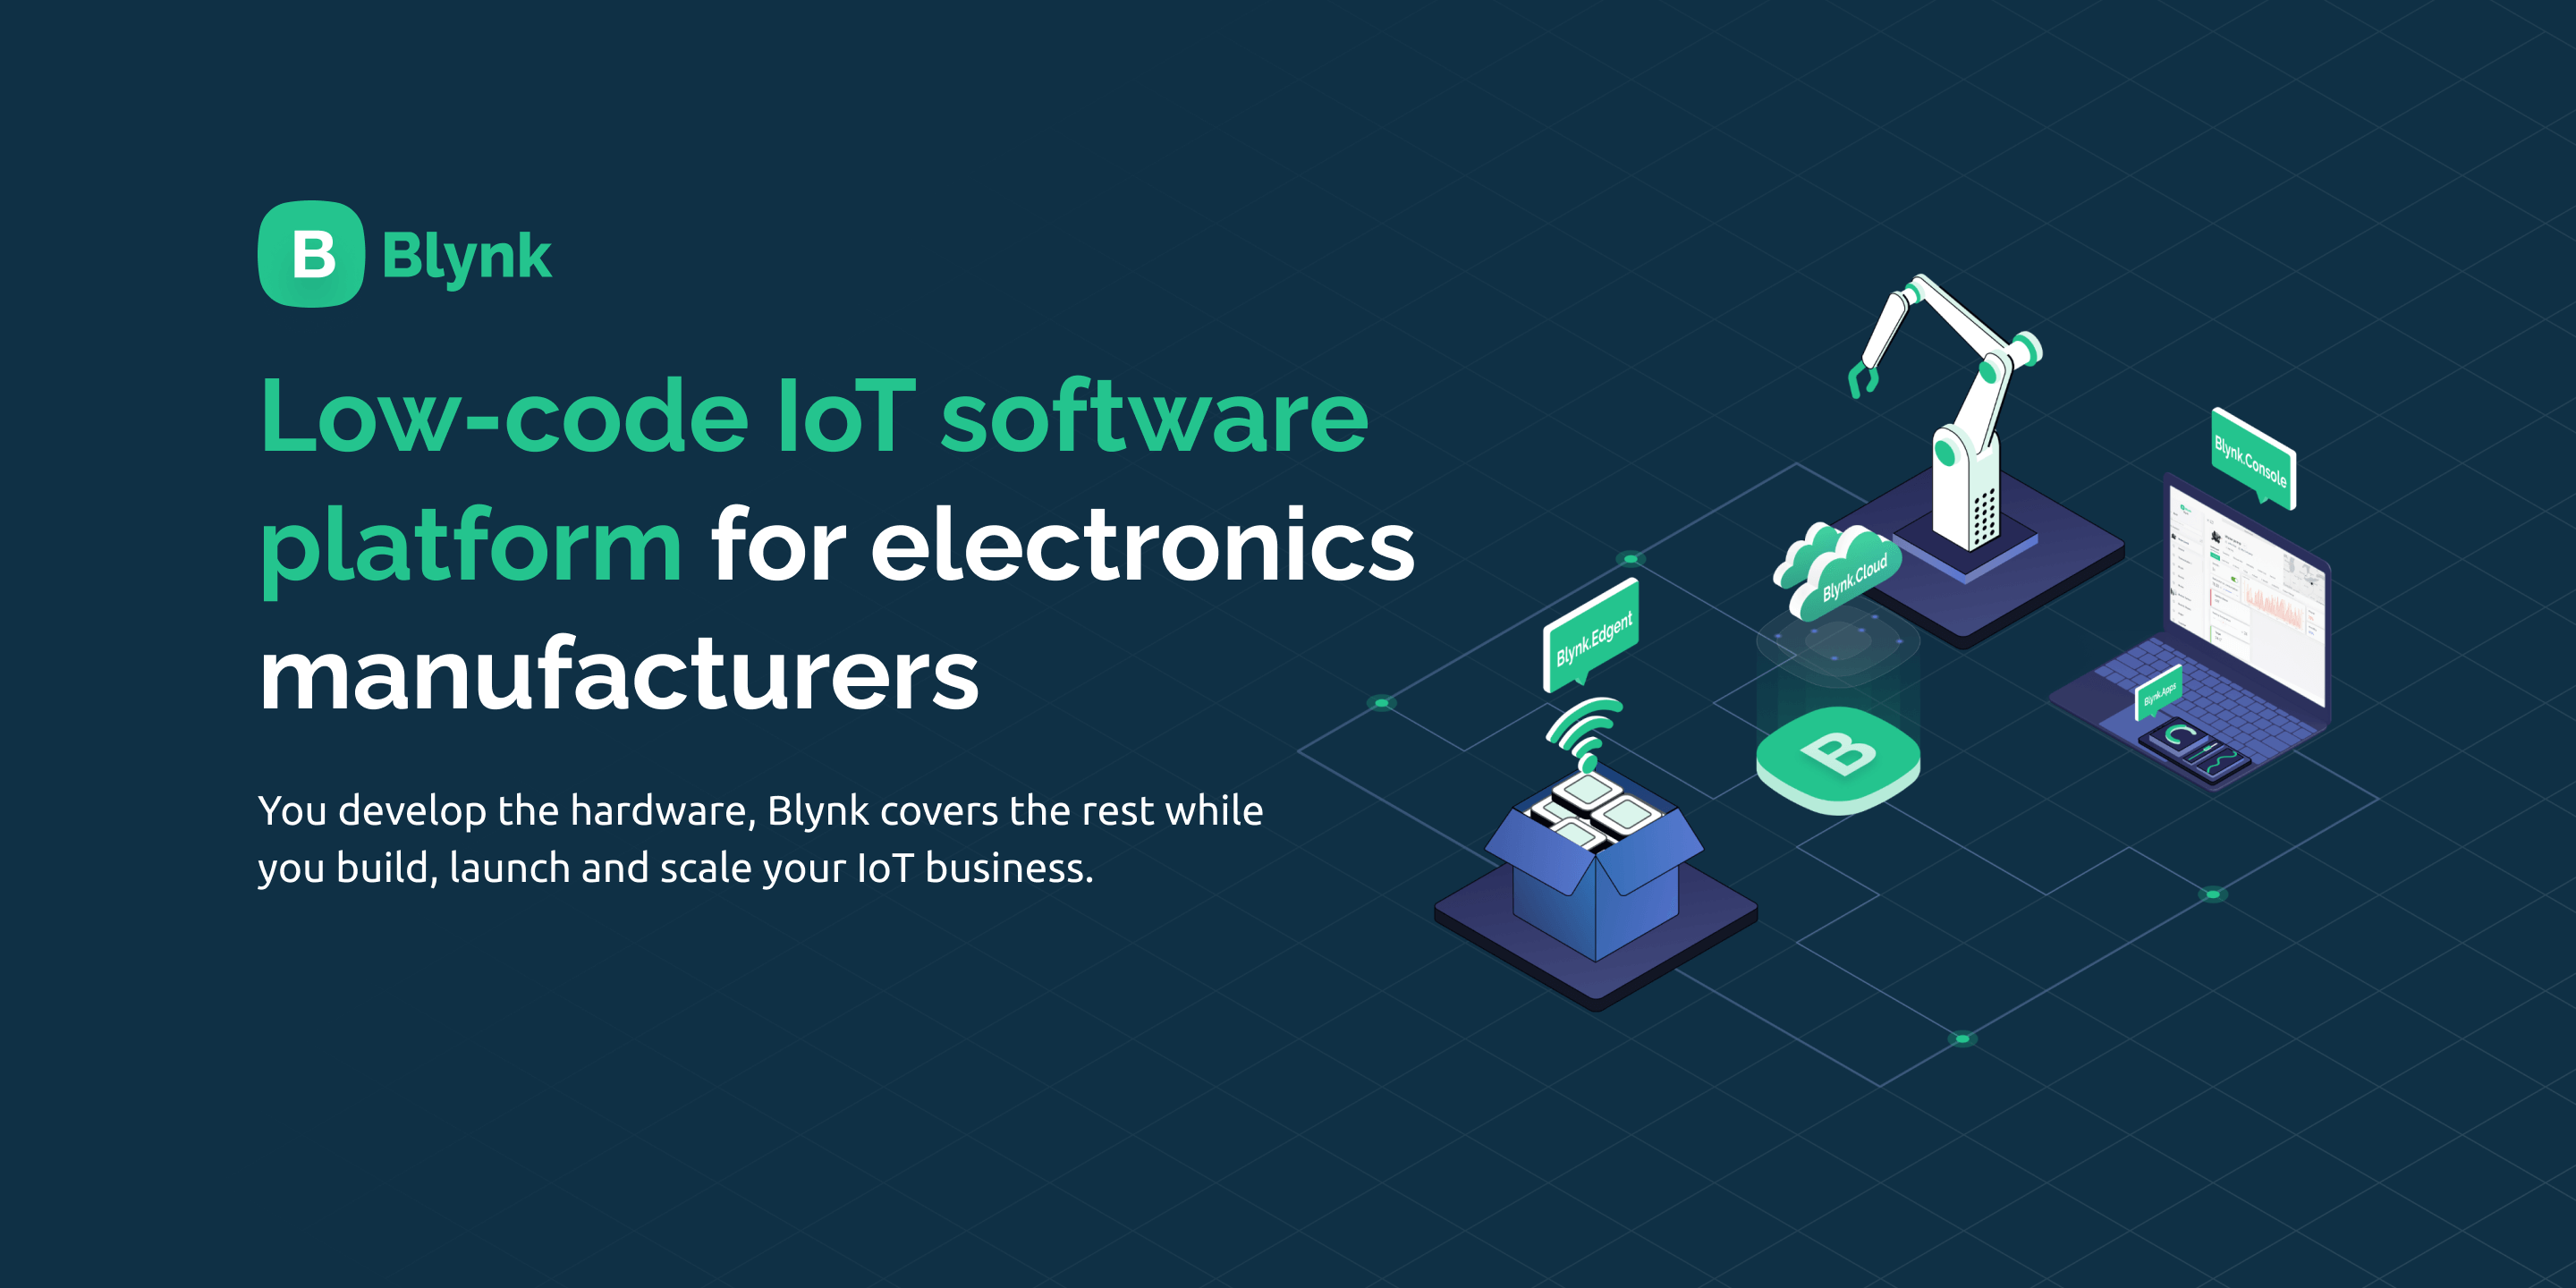 Low-code IoT software platform for electronic manufacturers